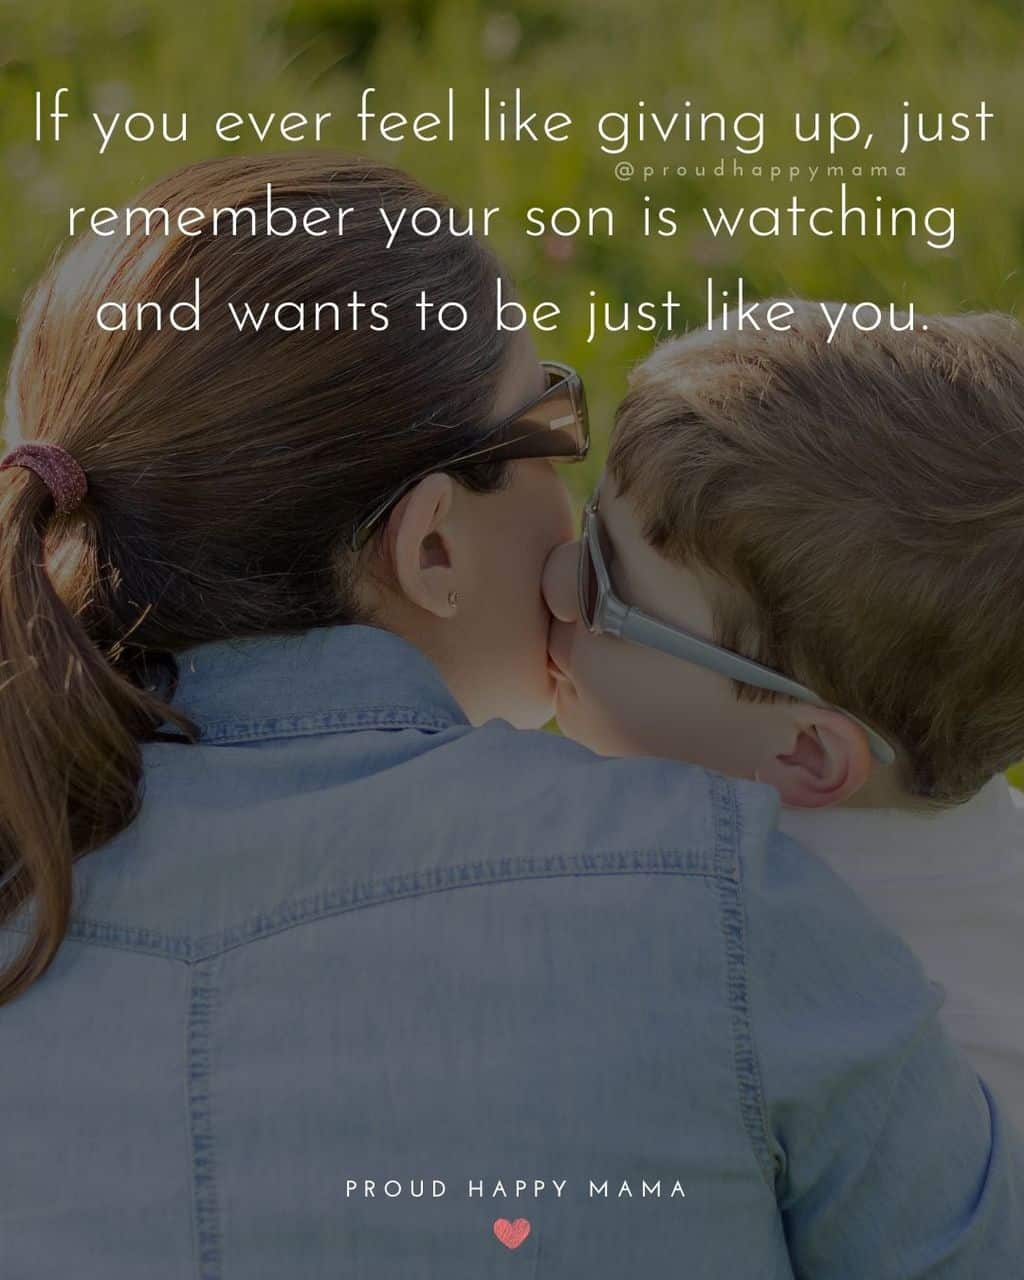 Son Quotes - If you ever feel like giving up, just remember your son is watching and wants to be just like you.’